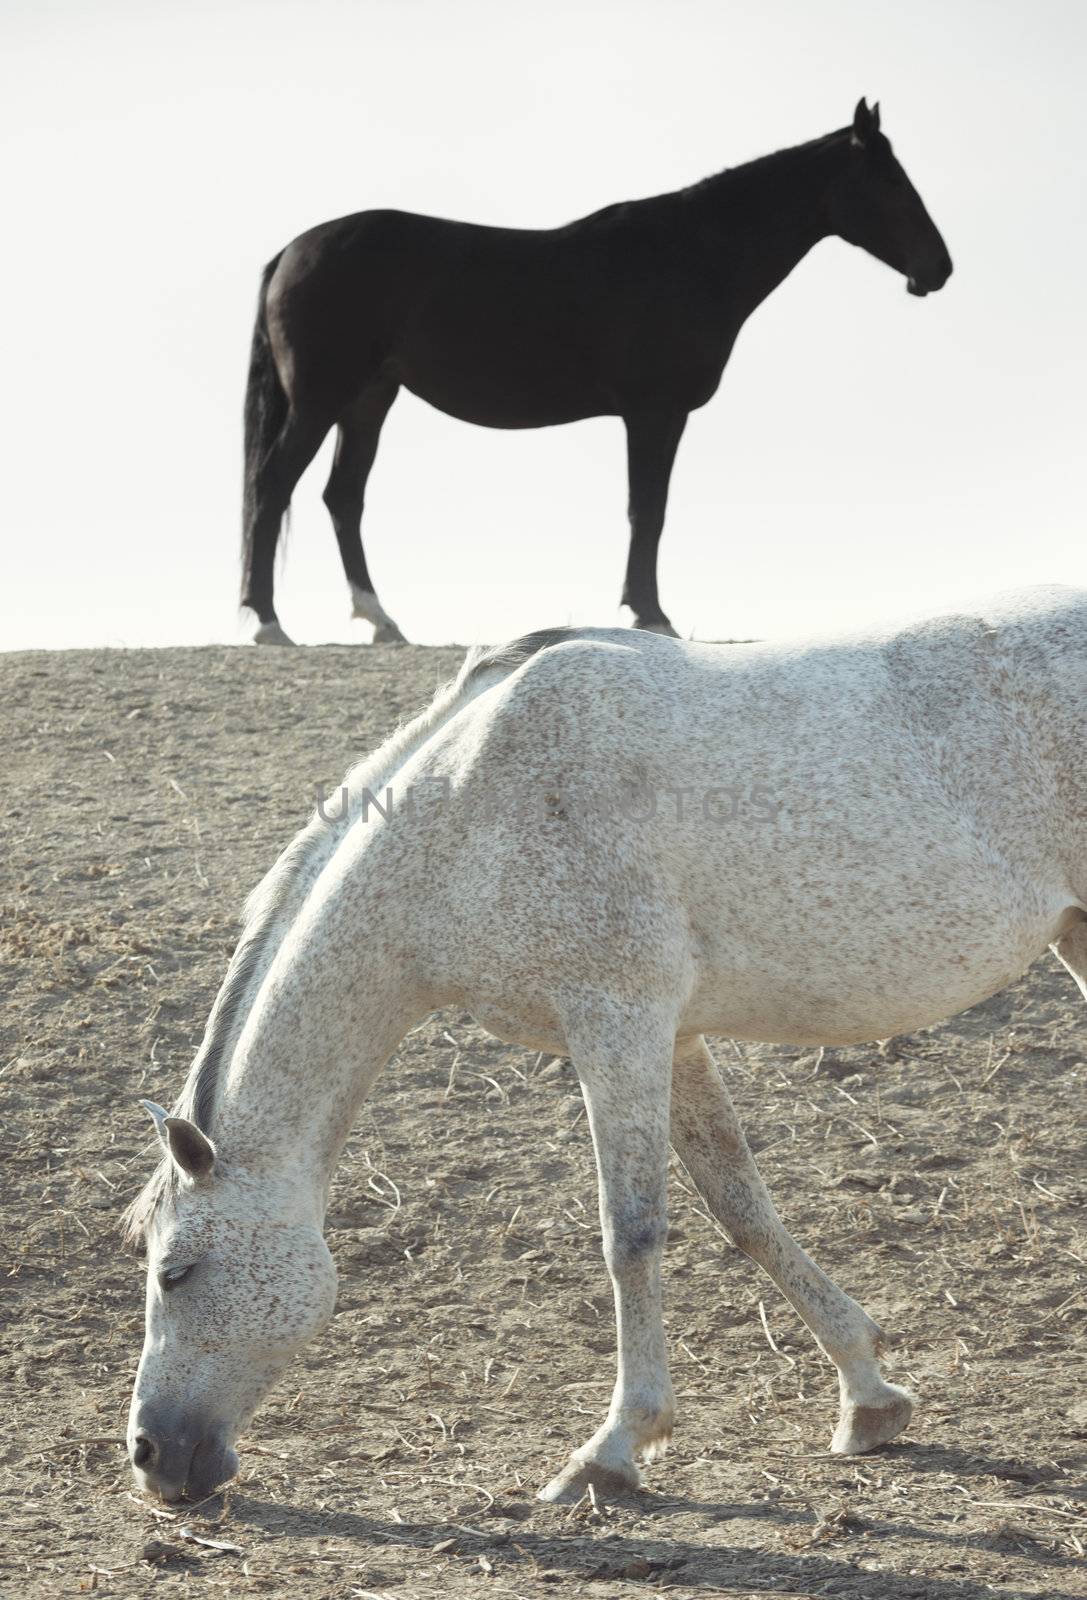 Black and white horses outdoors. Vertical photo. Natural light and colors